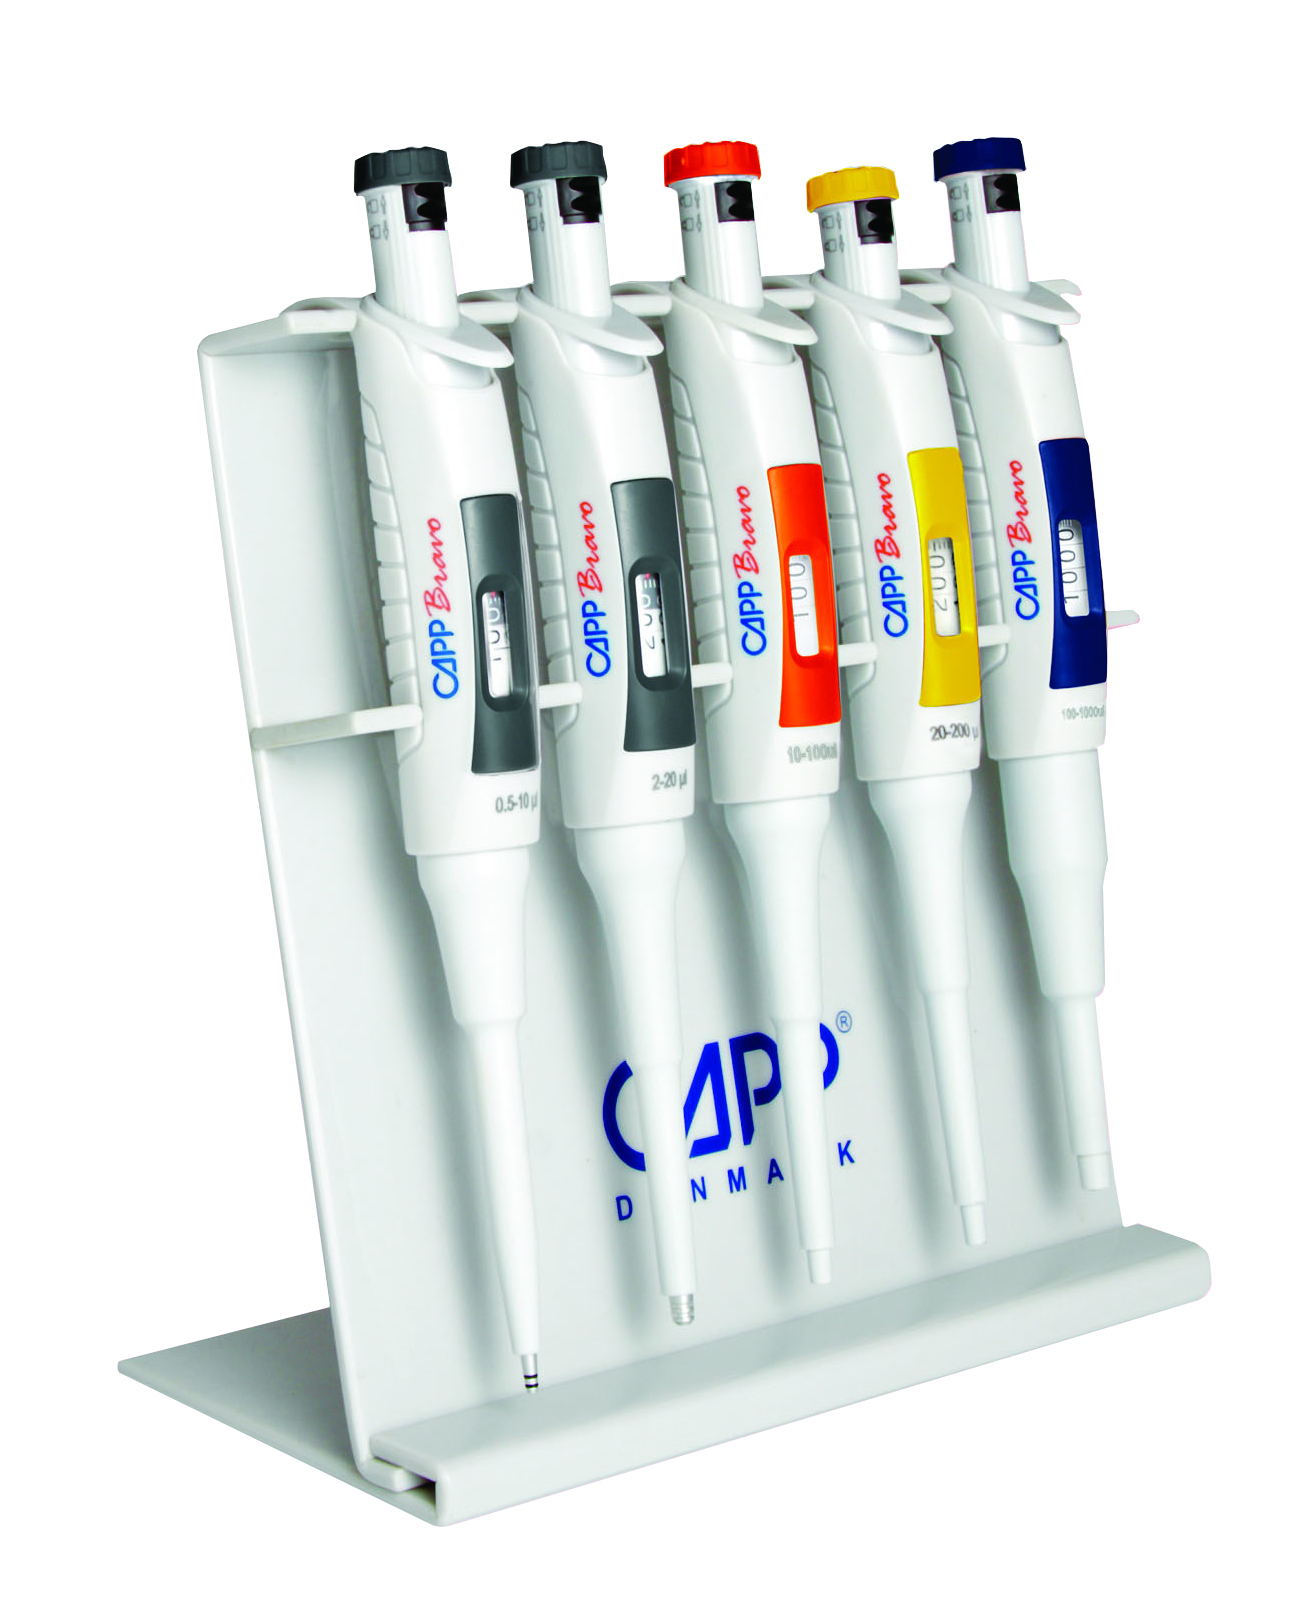 CAPP Laboratory Pipetting Instruments